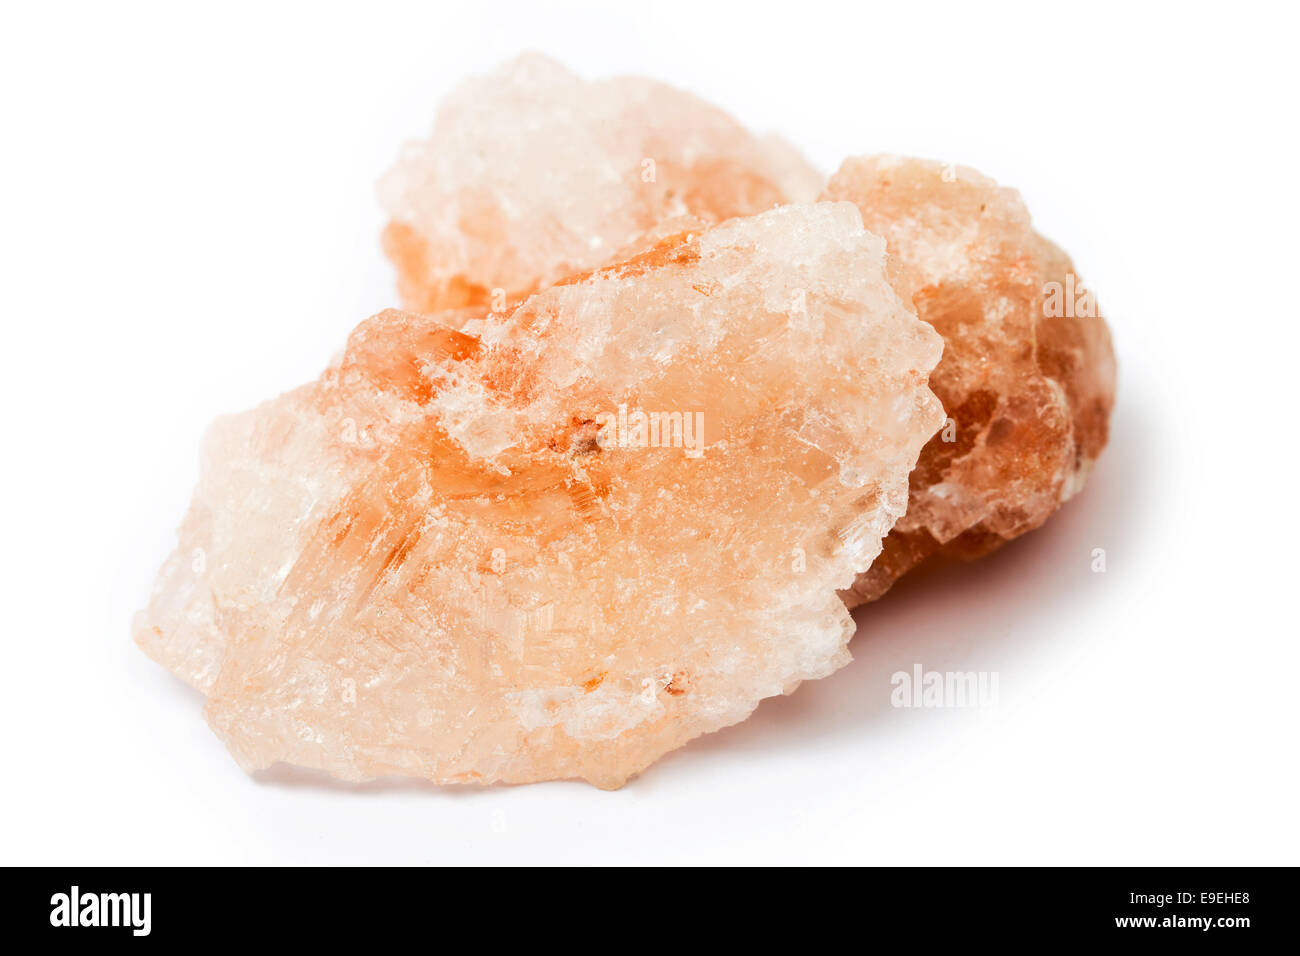 Crystalline Himalayan pink rock salt over a white background Stock Photo